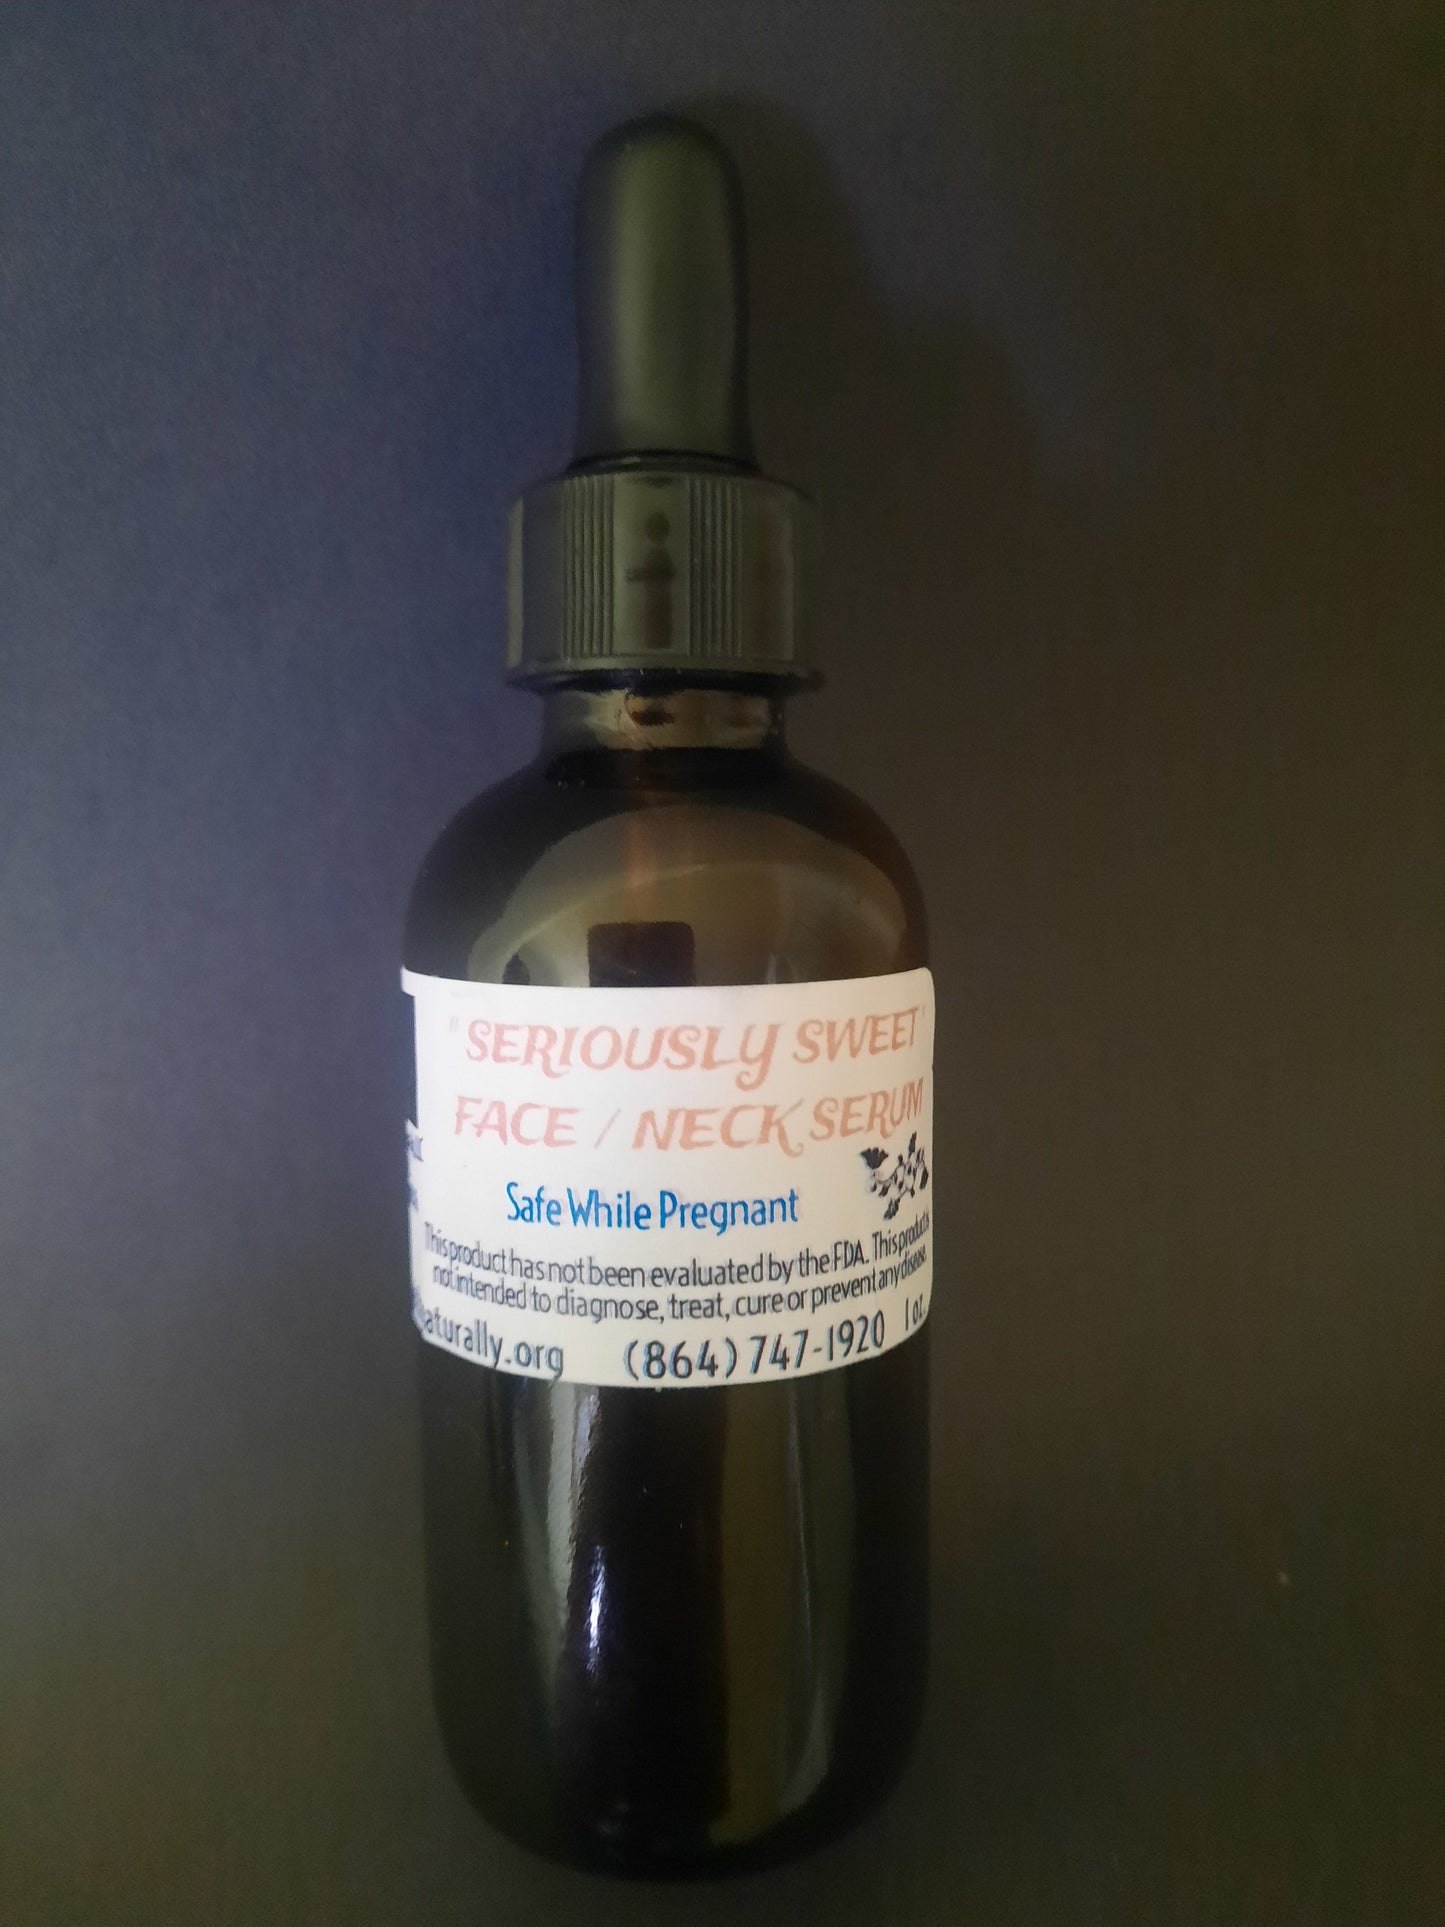 " SERIOUSLY SWEET " FACE / NECK SERUM